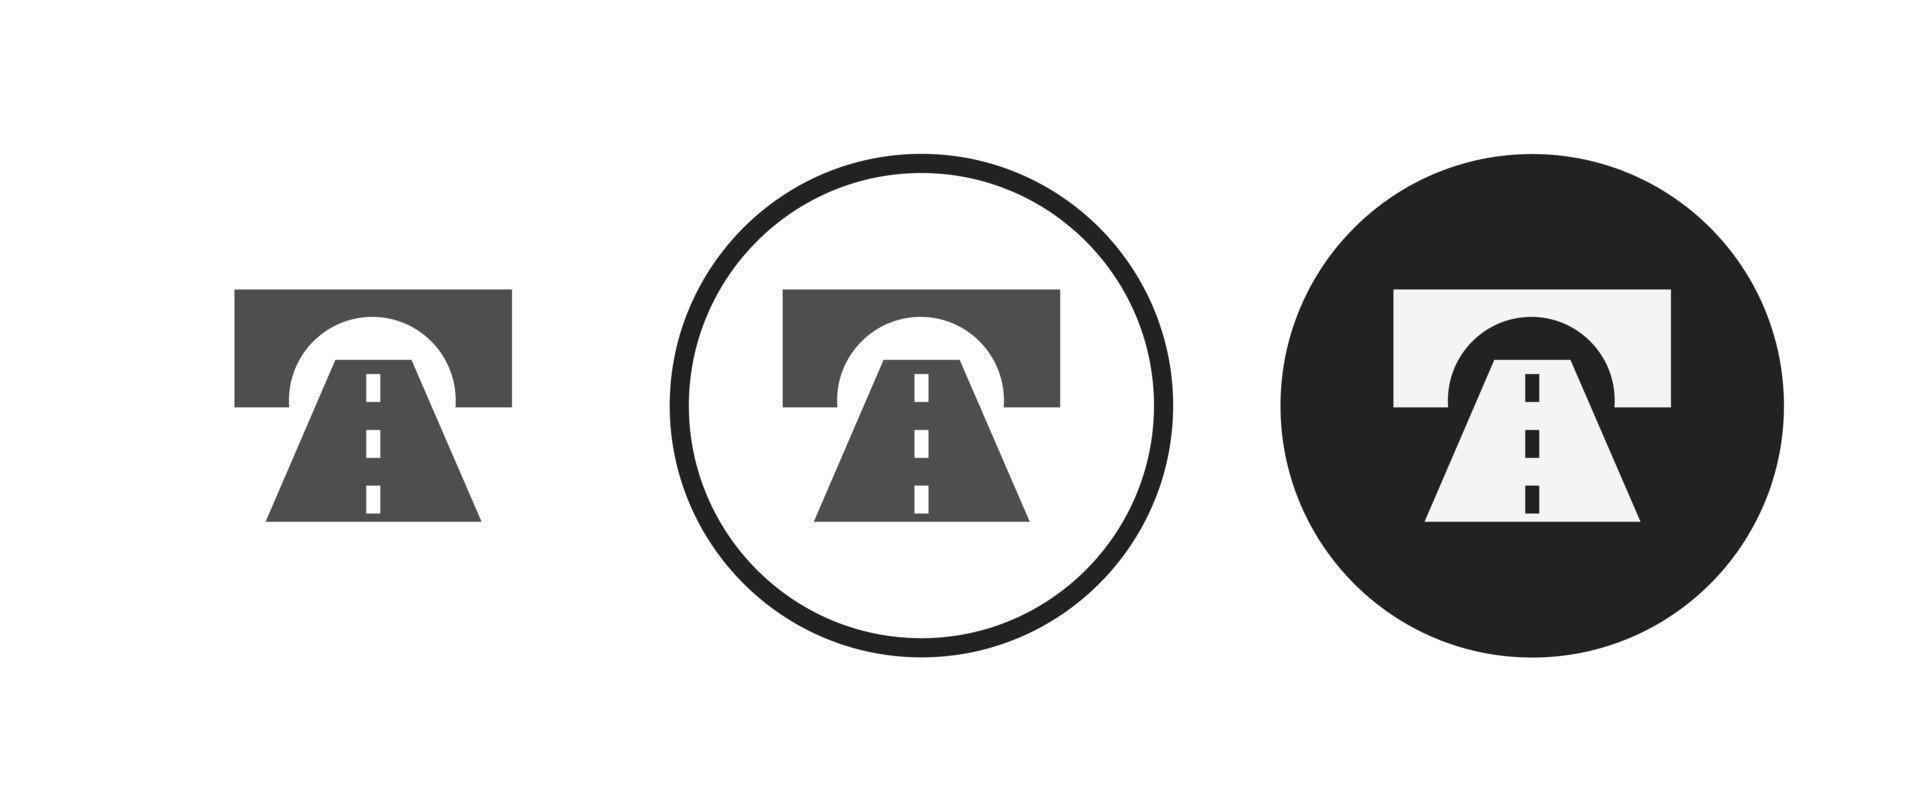 Tunnel road icon . web icon set . icons collection flat. Simple vector illustration.